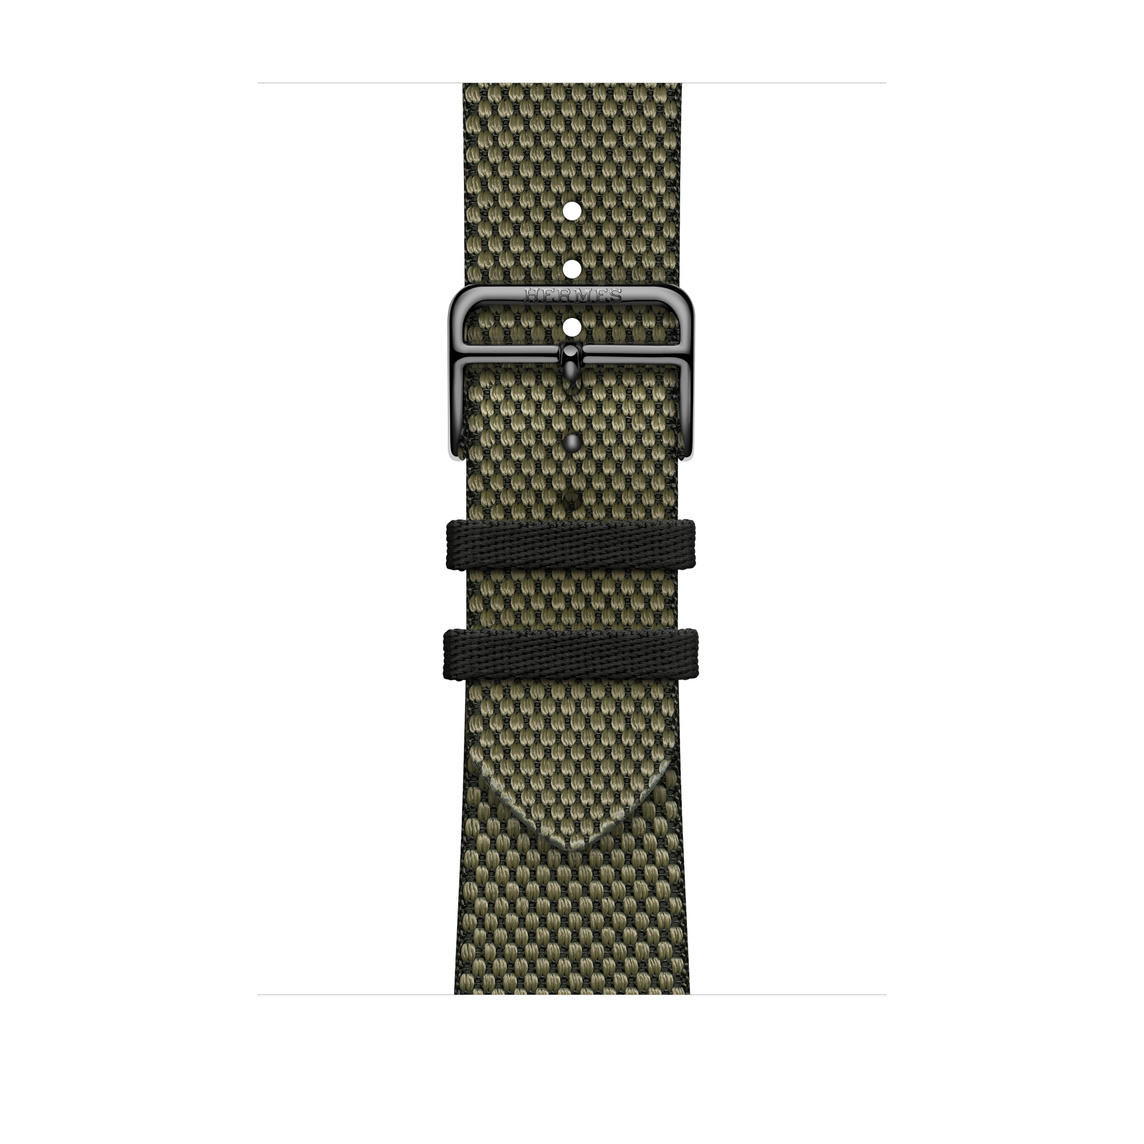 Vert (green) and Noir (black) Toile H Single Tour strap, showing Apple Watch face and digital crown.